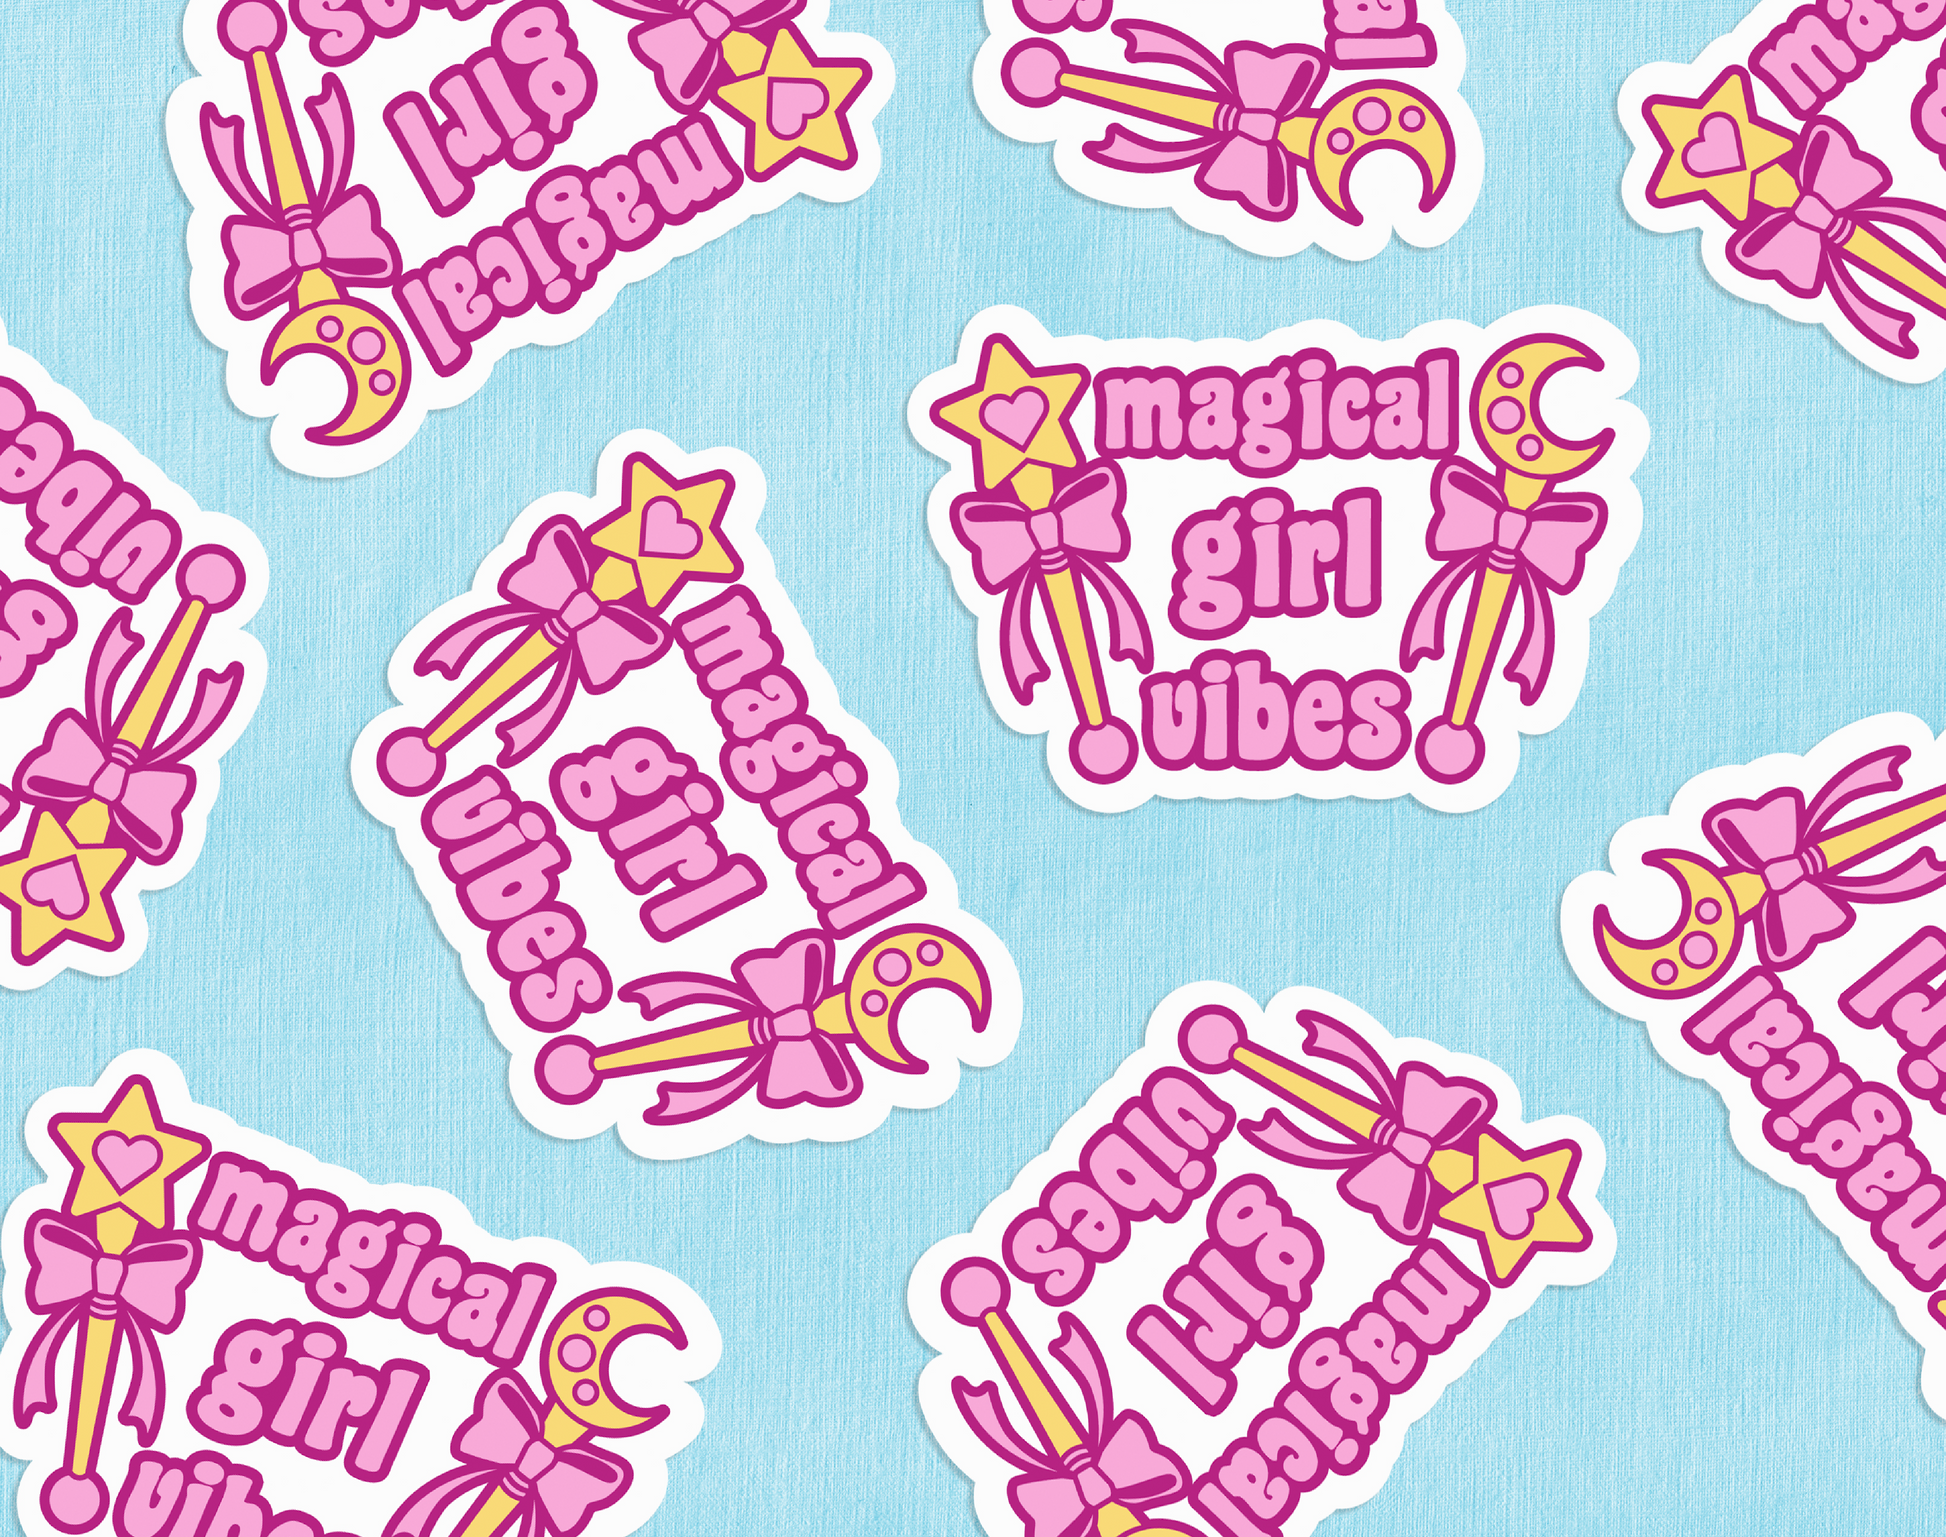 A group of diecut stickers featuring two gold wands with pink bows and pink text reading "Magical girl vibes" against a blue paper backdrop